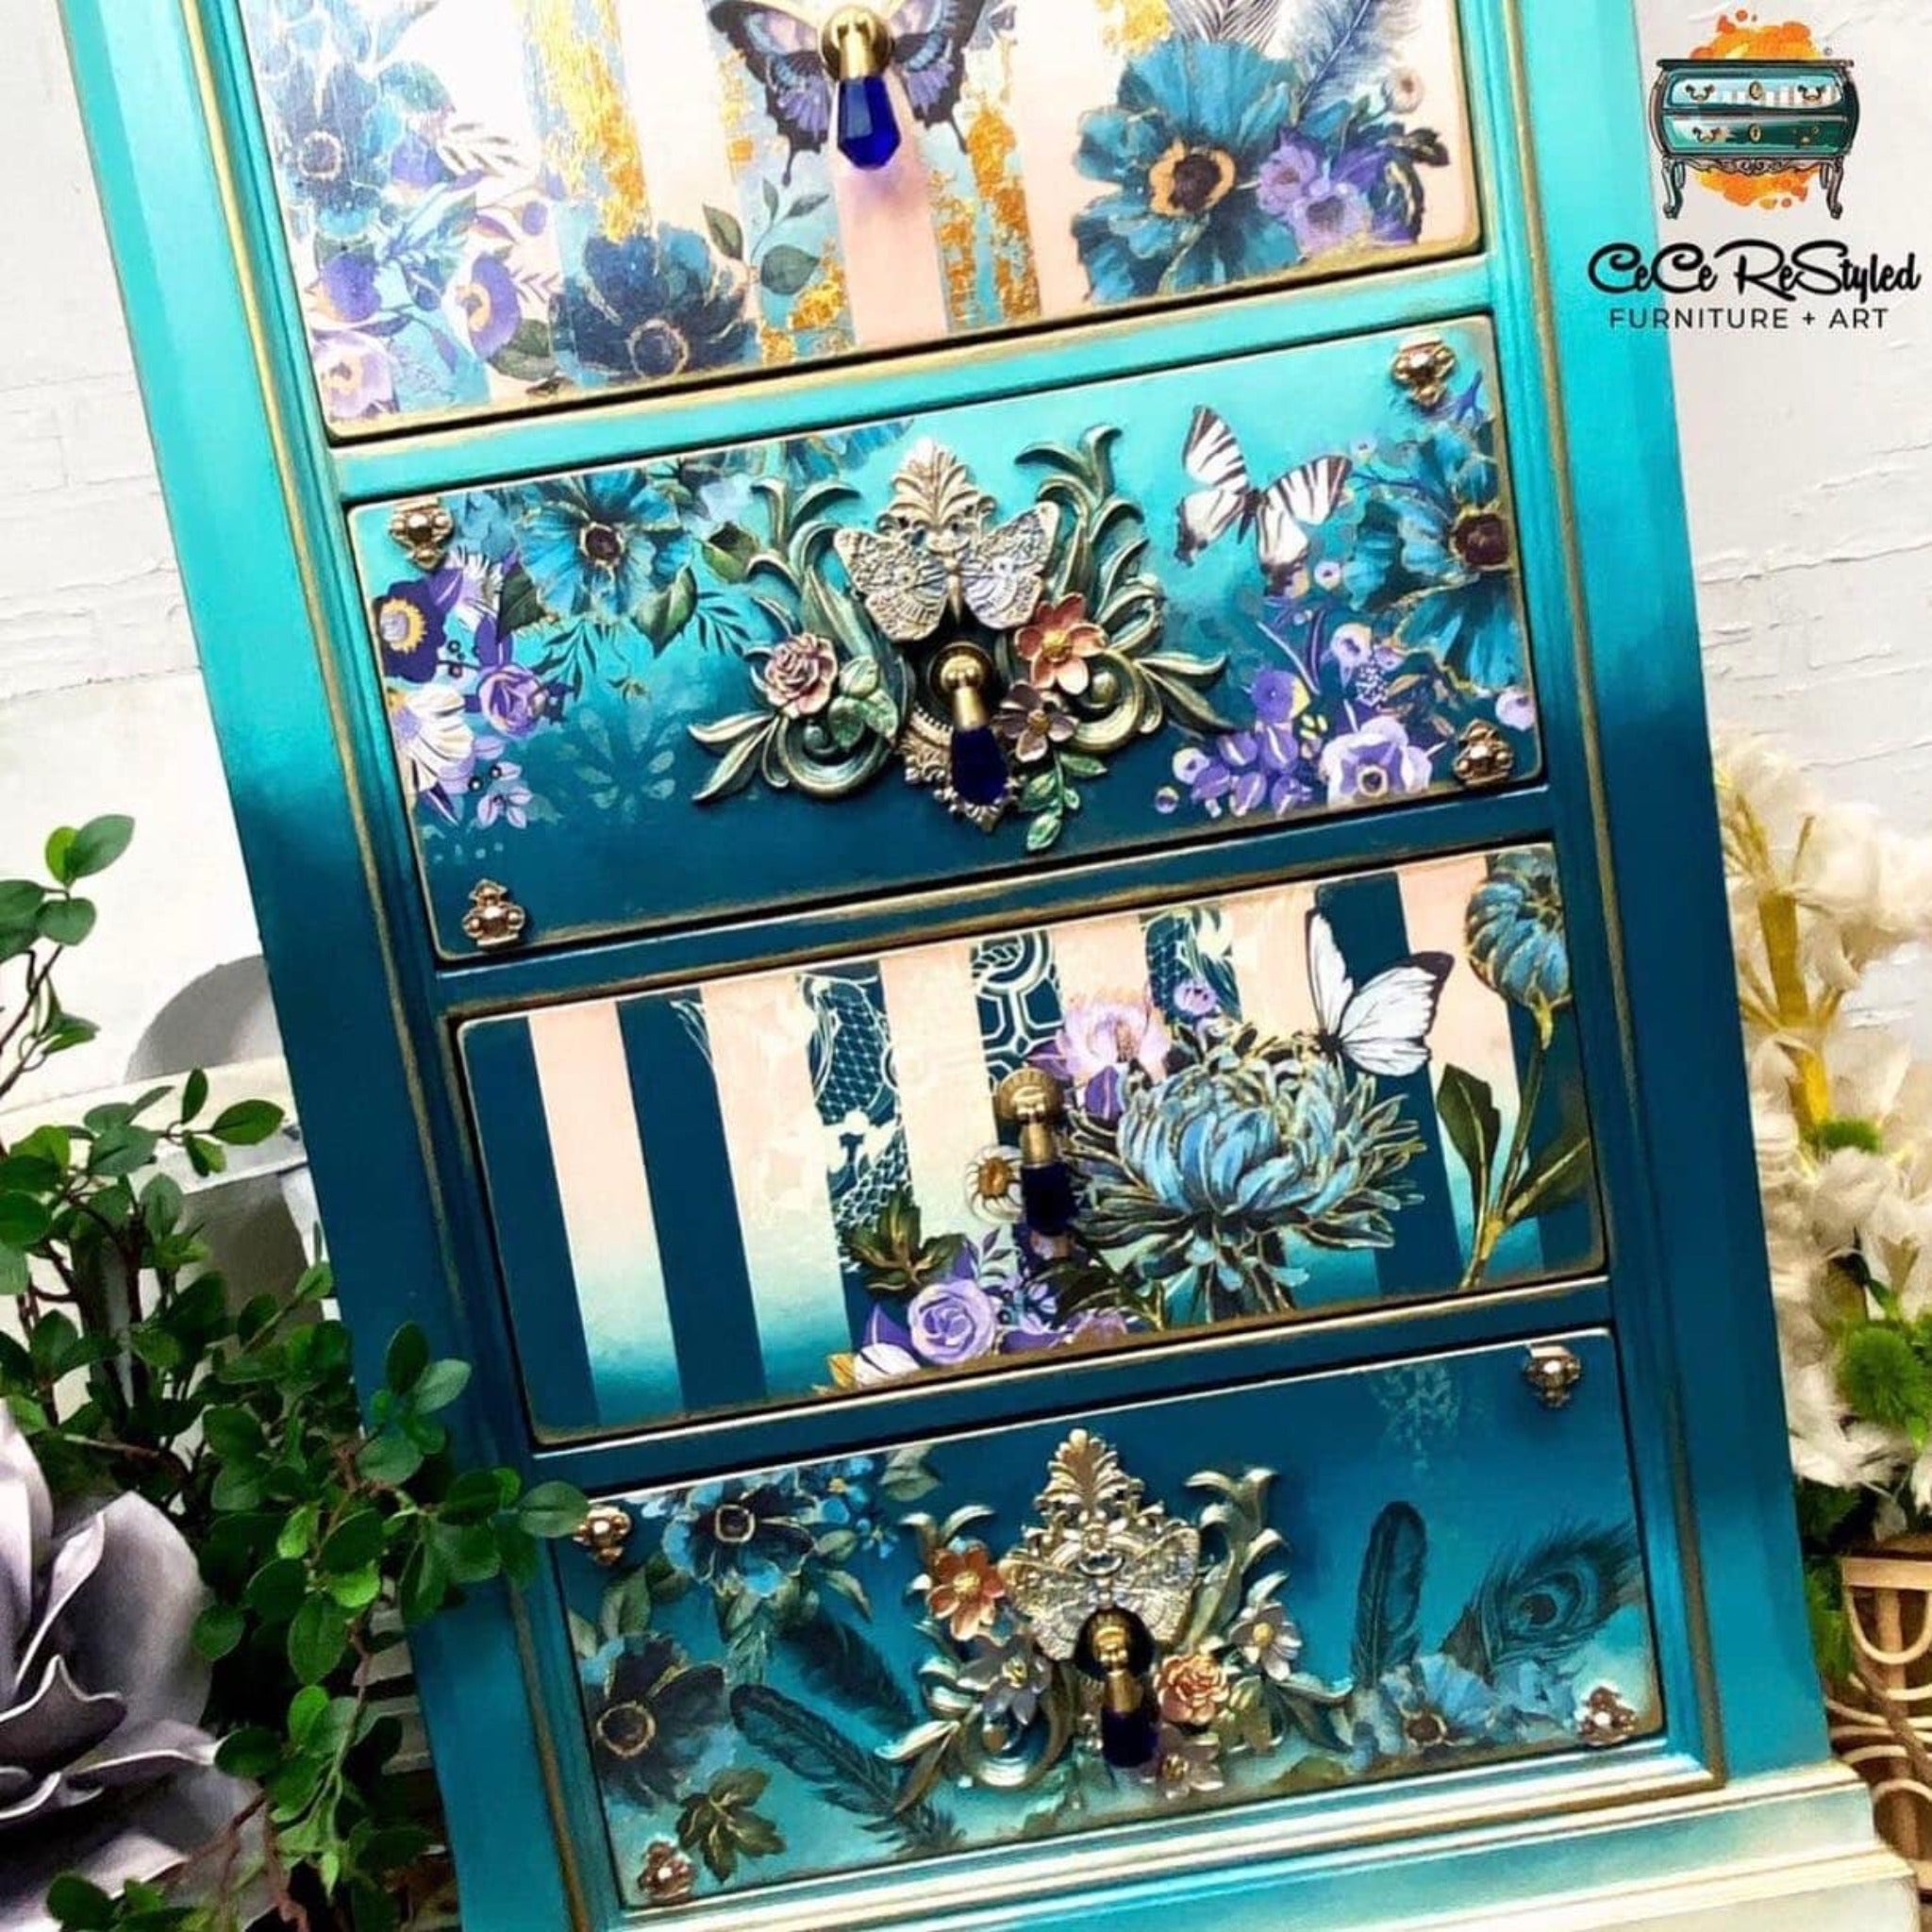 A close-up of a 6-drawer lingerie chest refurbished by CeCe ReStyled is painted an ombre blend of white down to dark teal and features ReDesign with Prima's Gilded Floral small transfer on some of its drawers along with a few other floral transfers and silicone mould castings.